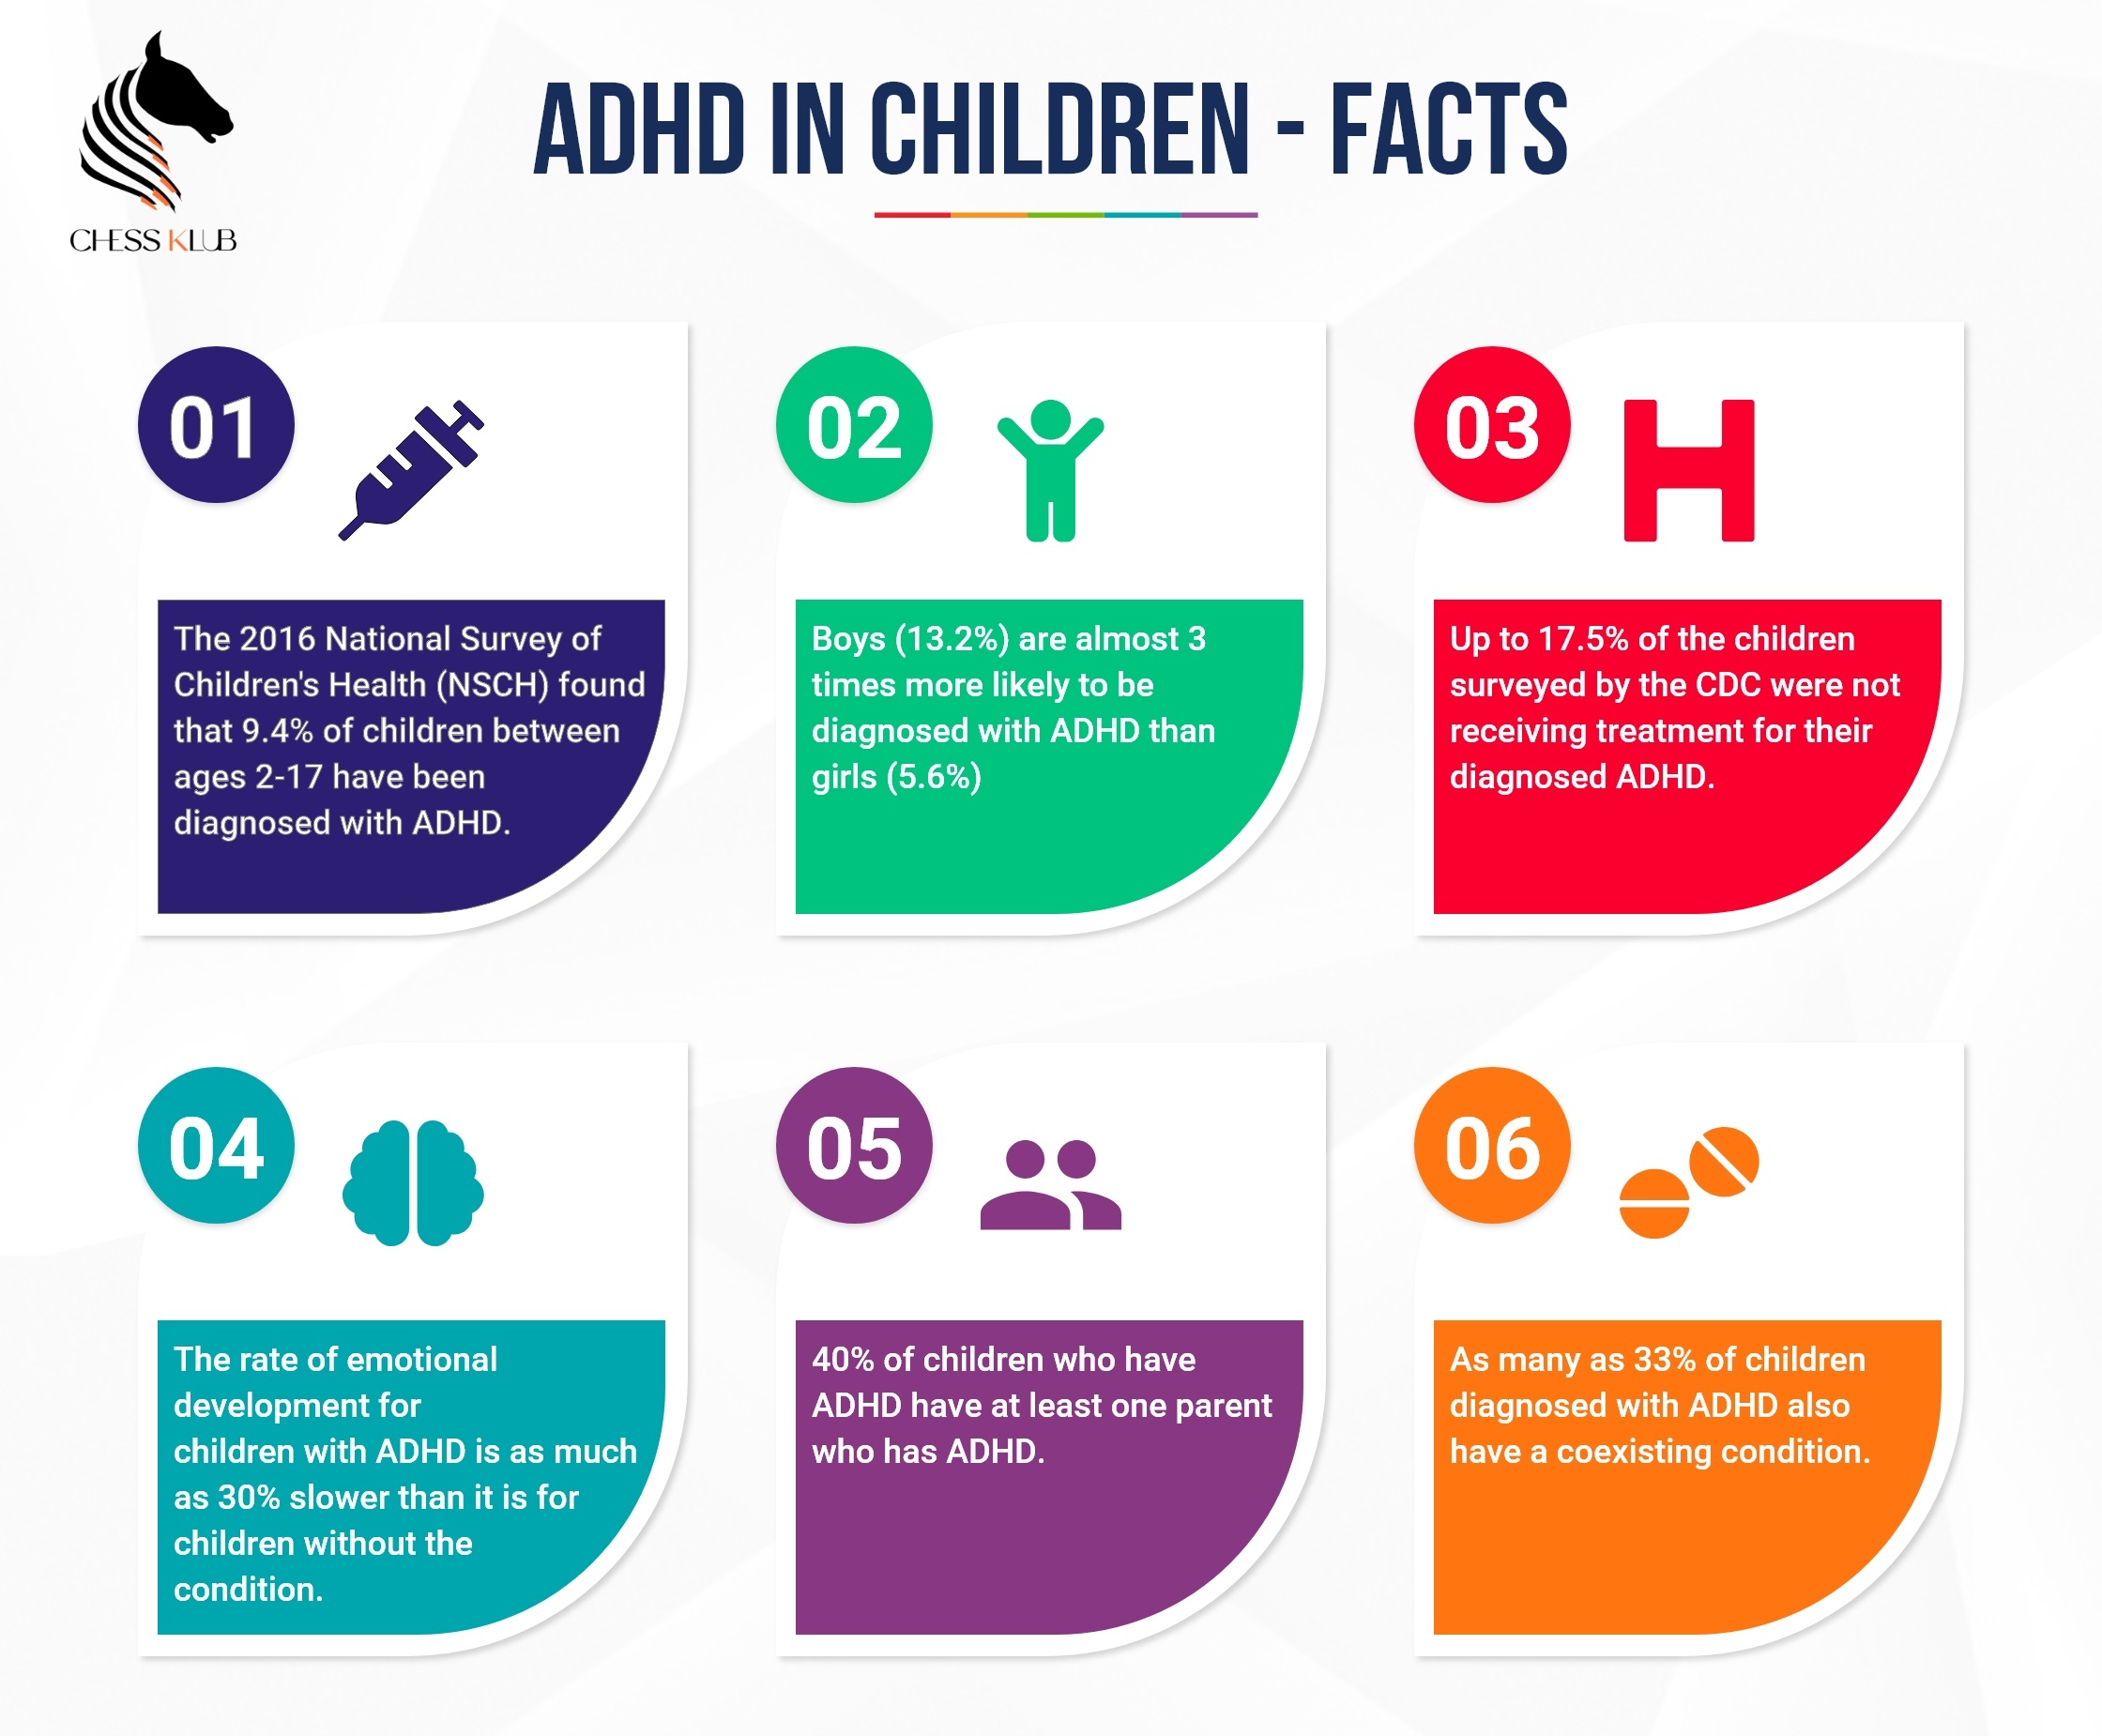 ADHD in Children - Facts and Numbers